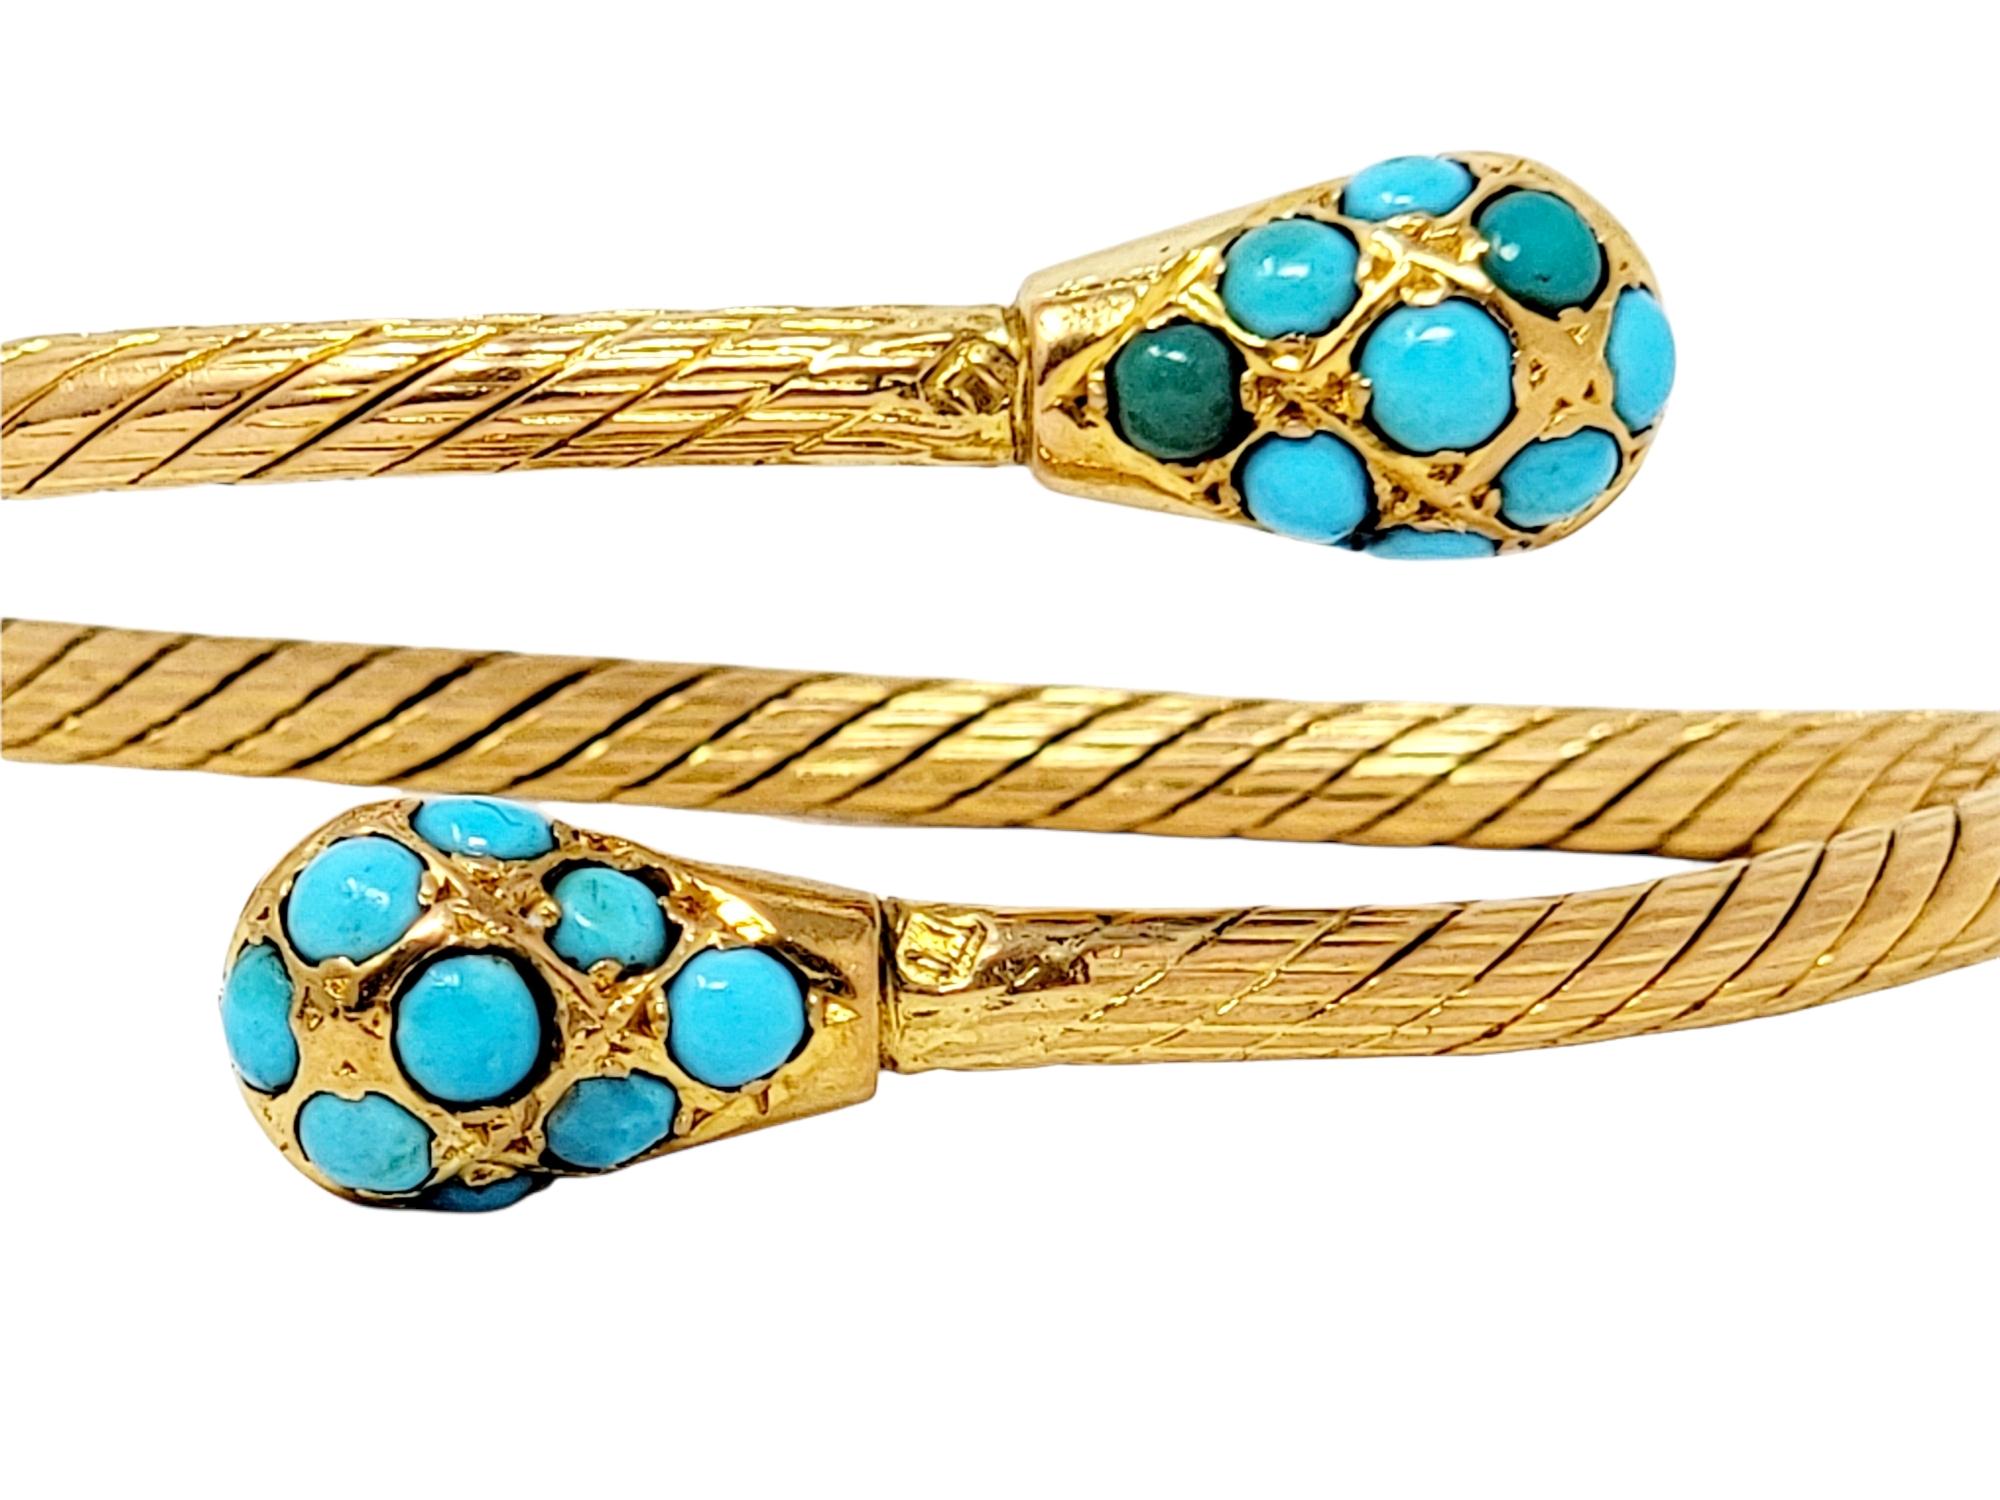 Gorgeous bypass style bracelet features 18 cabochon turquoise stones set in rounded 18 karat yellow gold ends. The stunning natural stones all vary slightly in color, showcasing their stunning blueish-green hues. The narrow band of the flexible